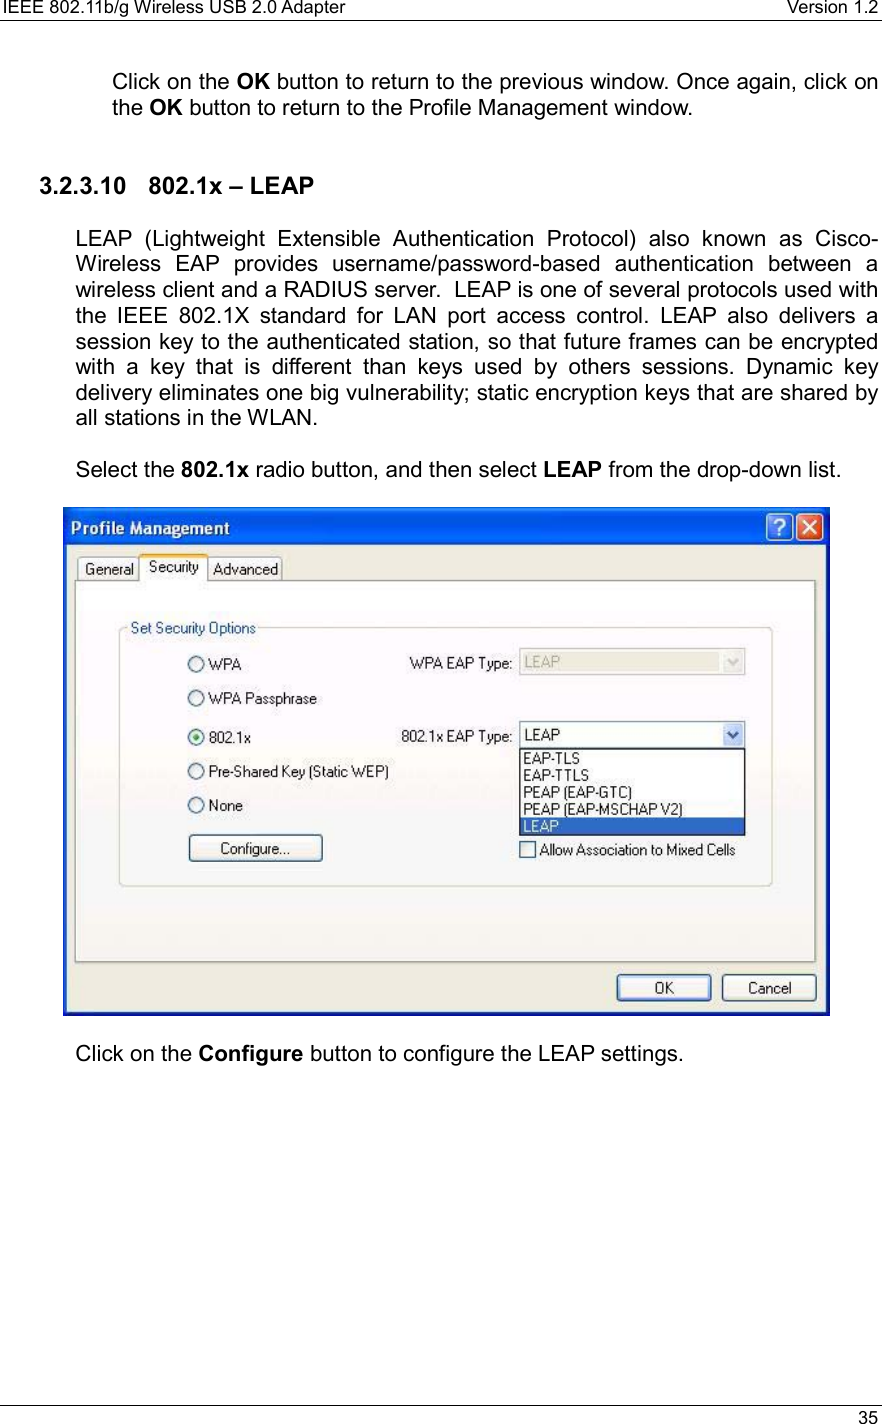 IEEE 802.11b/g Wireless USB 2.0 Adapter    Version 1.2   35  Click on the OK button to return to the previous window. Once again, click on the OK button to return to the Profile Management window.     3.2.3.10  802.1x – LEAP  LEAP (Lightweight Extensible Authentication Protocol) also known as Cisco-Wireless EAP provides username/password-based authentication between a wireless client and a RADIUS server.  LEAP is one of several protocols used with the IEEE 802.1X standard for LAN port access control. LEAP also delivers a session key to the authenticated station, so that future frames can be encrypted with a key that is different than keys used by others sessions. Dynamic key delivery eliminates one big vulnerability; static encryption keys that are shared by all stations in the WLAN.  Select the 802.1x radio button, and then select LEAP from the drop-down list.     Click on the Configure button to configure the LEAP settings.  